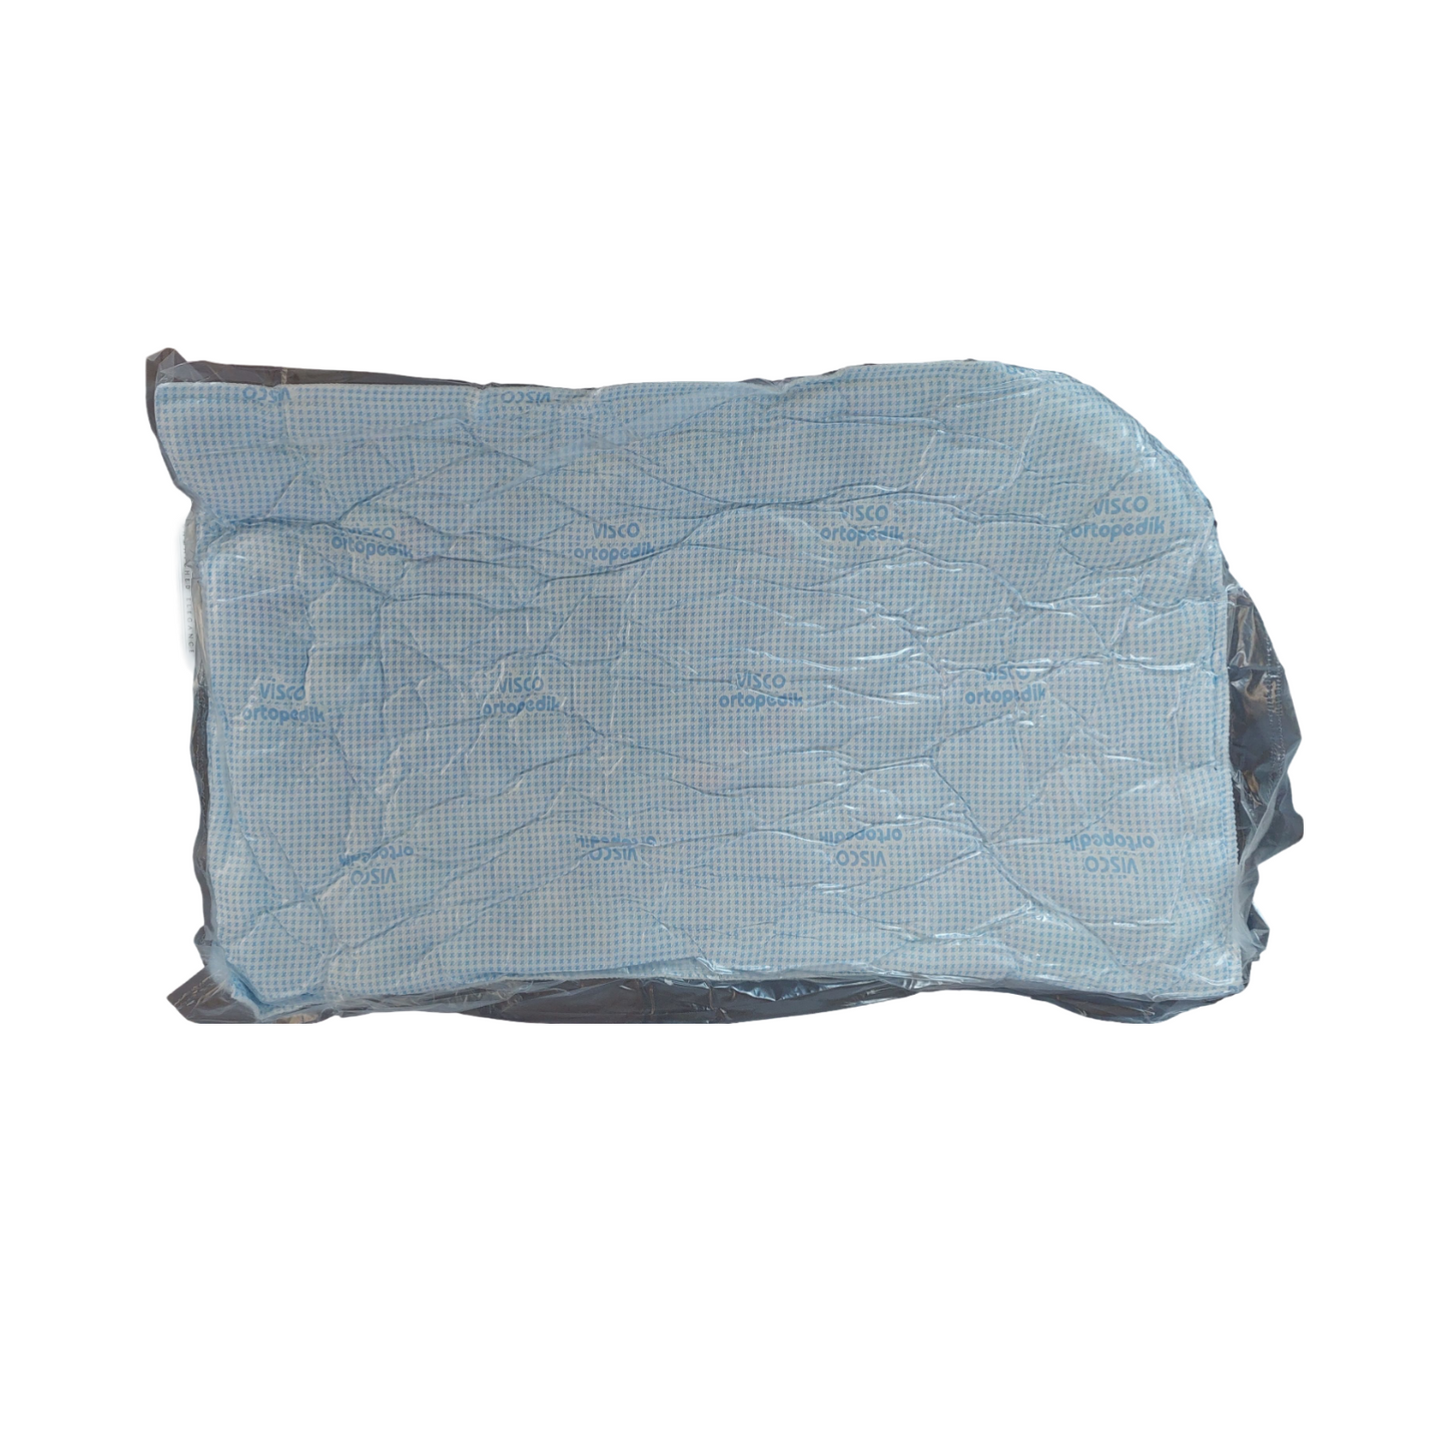 Pillow with microsilicone filling 1000g.